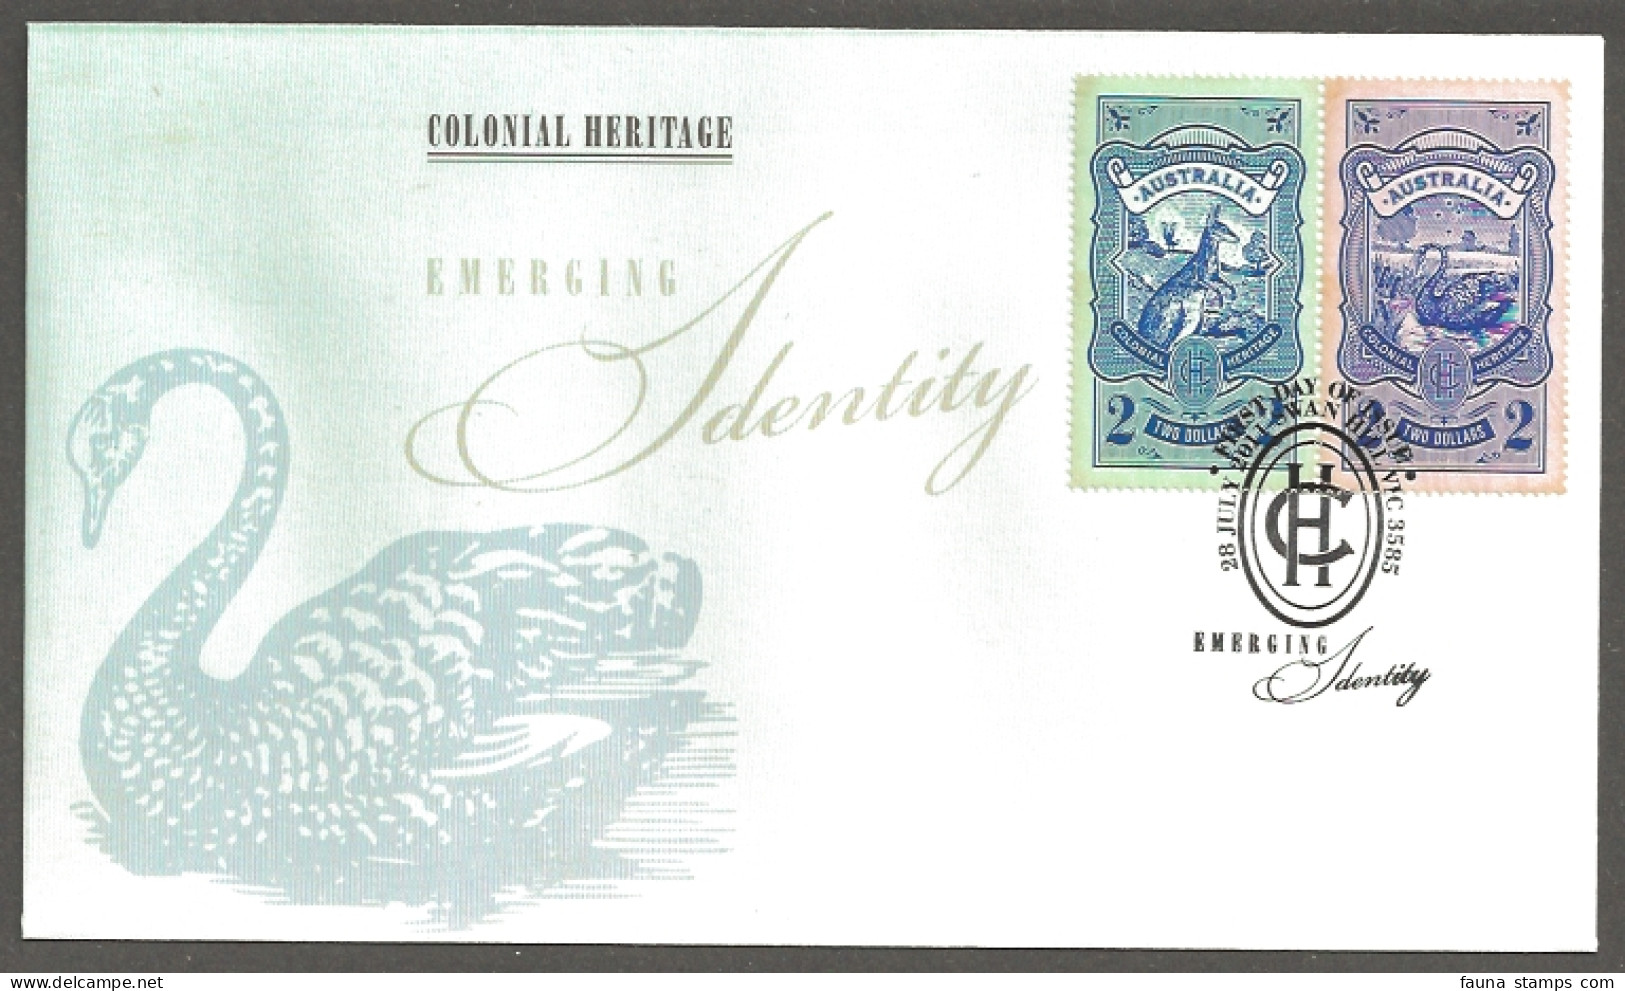 Australia - Colonial Heritage - Emerging Identity, FDC With 2 Stamps, 2011 - Cygnes